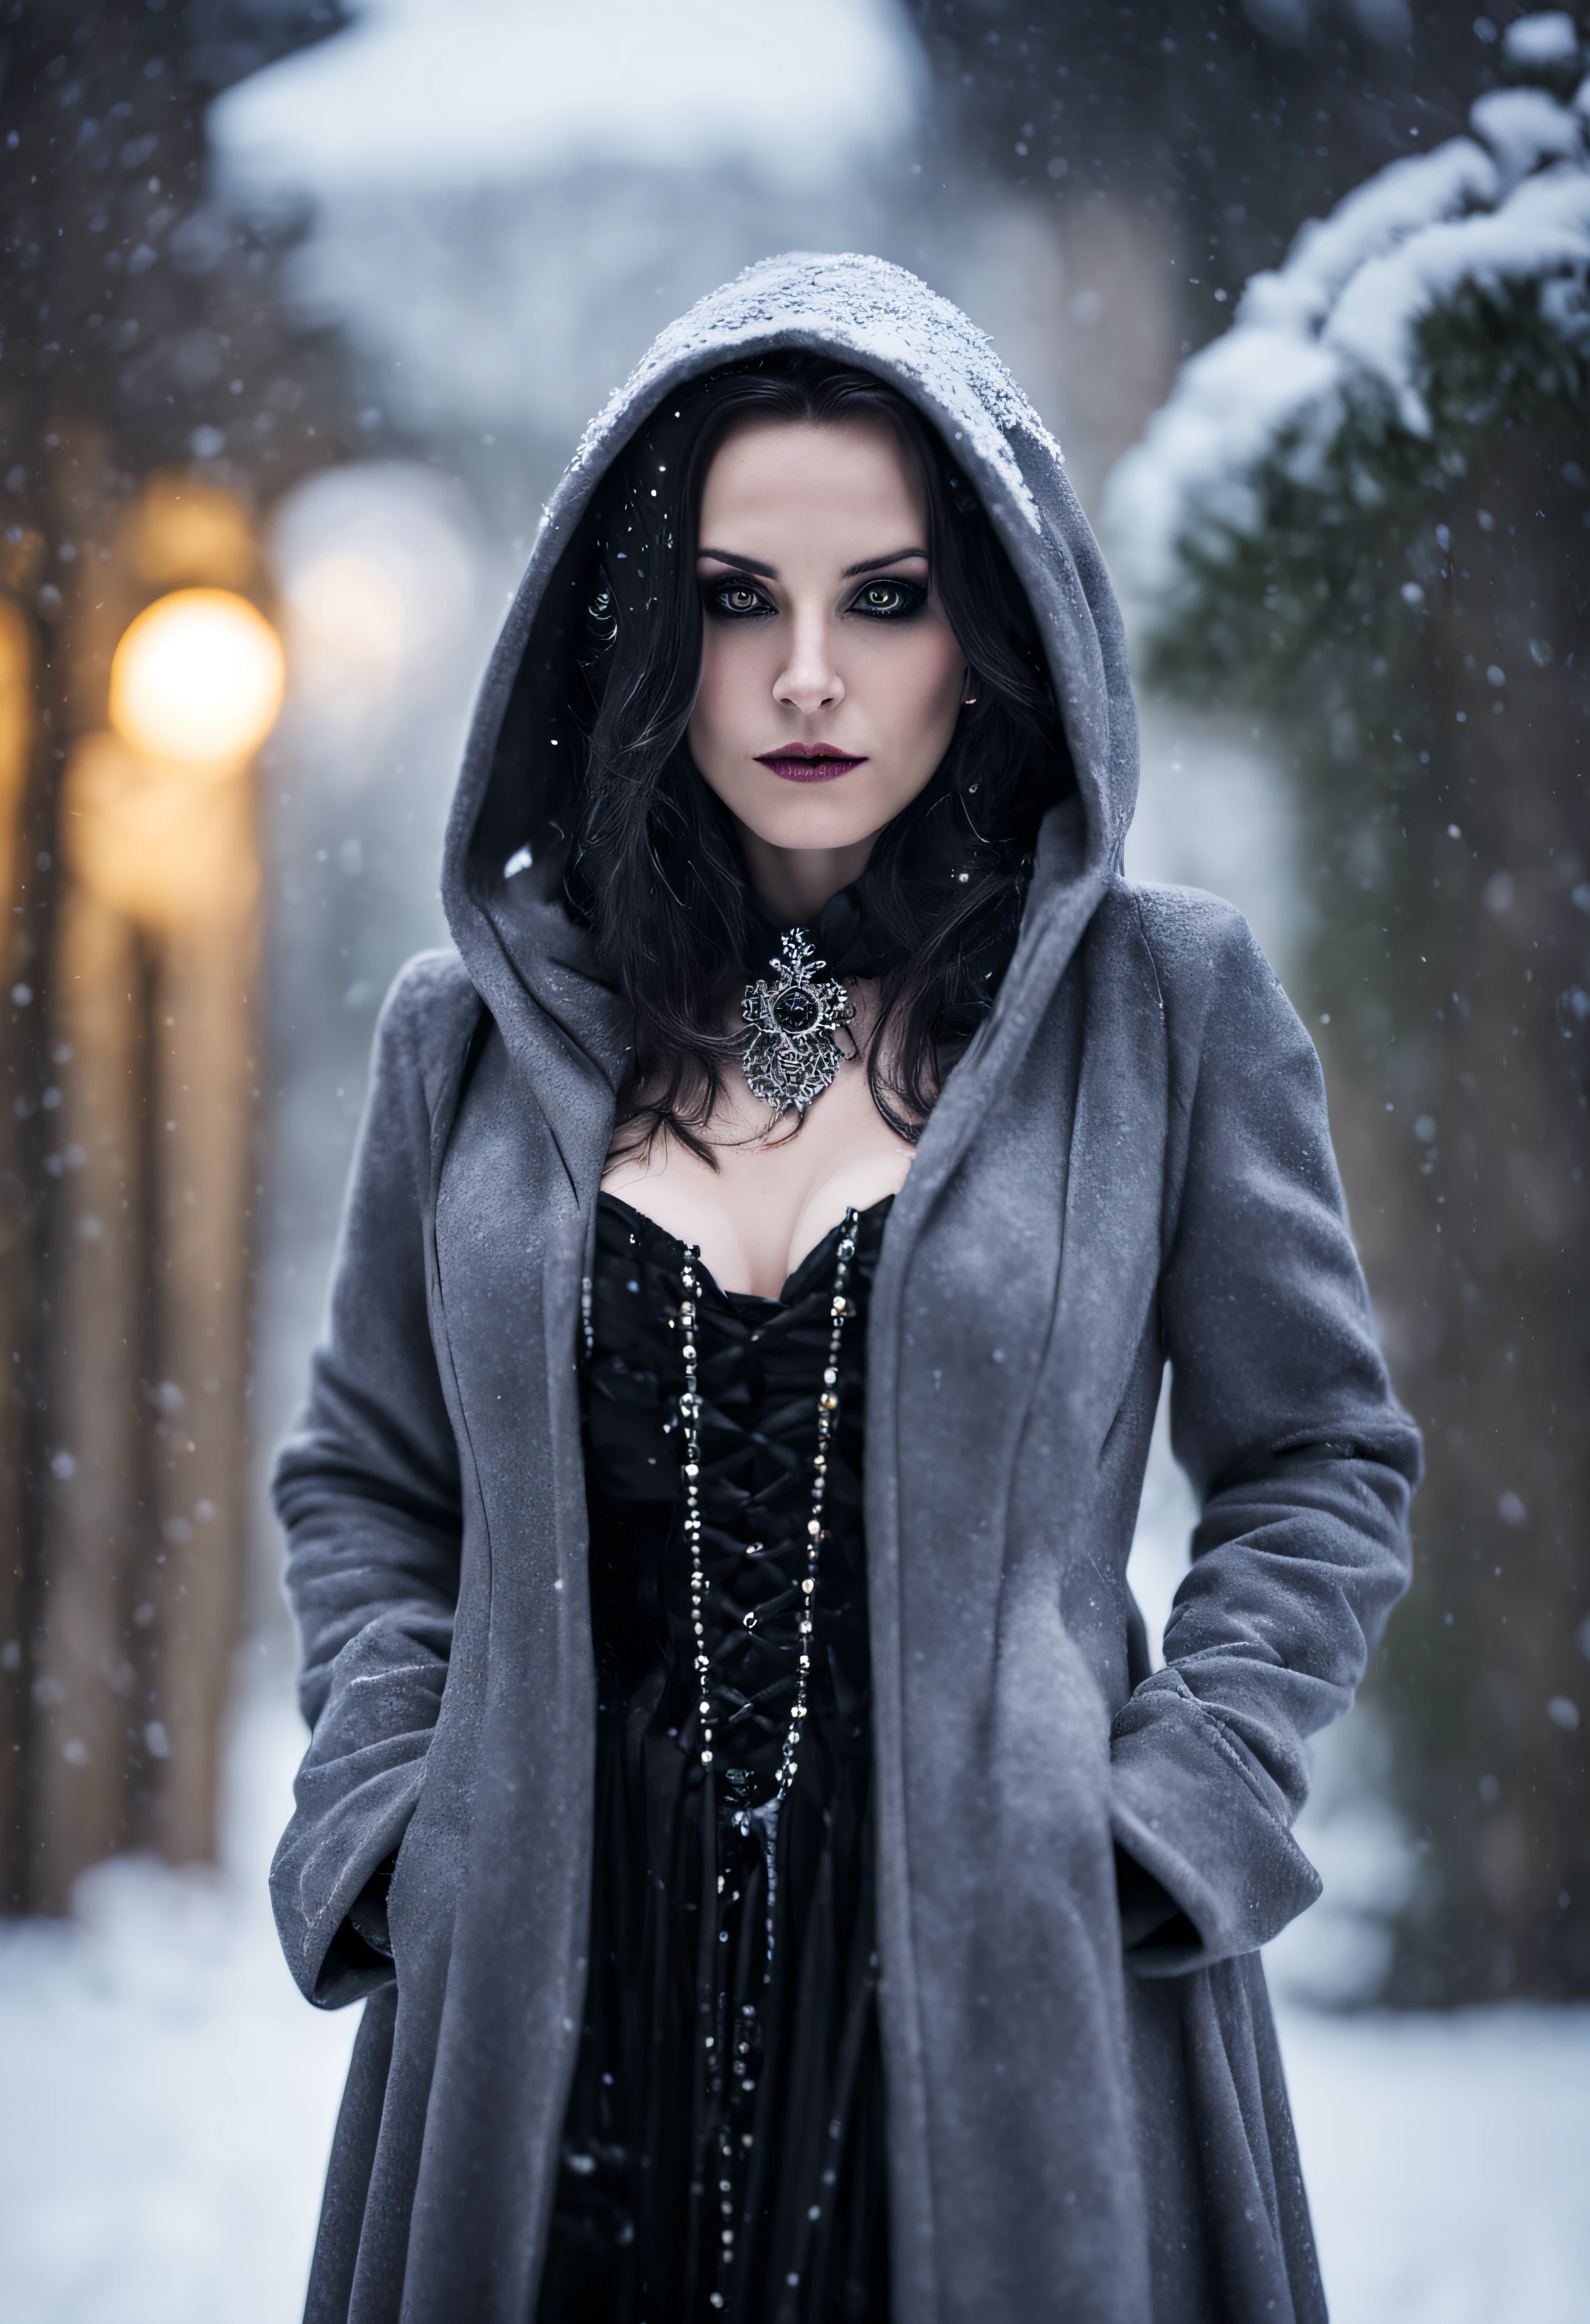 on location, ((( blizzard, snow ))), bokeh, shallow depth of field, ((empty background )), 37 year old woman, (greying):0.1, very feminine, goth, Spanish:2, (( thigh-length hair )), heavy goth dress, heavy floor length coat with hood not lifted, ornate:2 choker, small breasts, (( plus size ):0.2), ((rectangle)) body shape